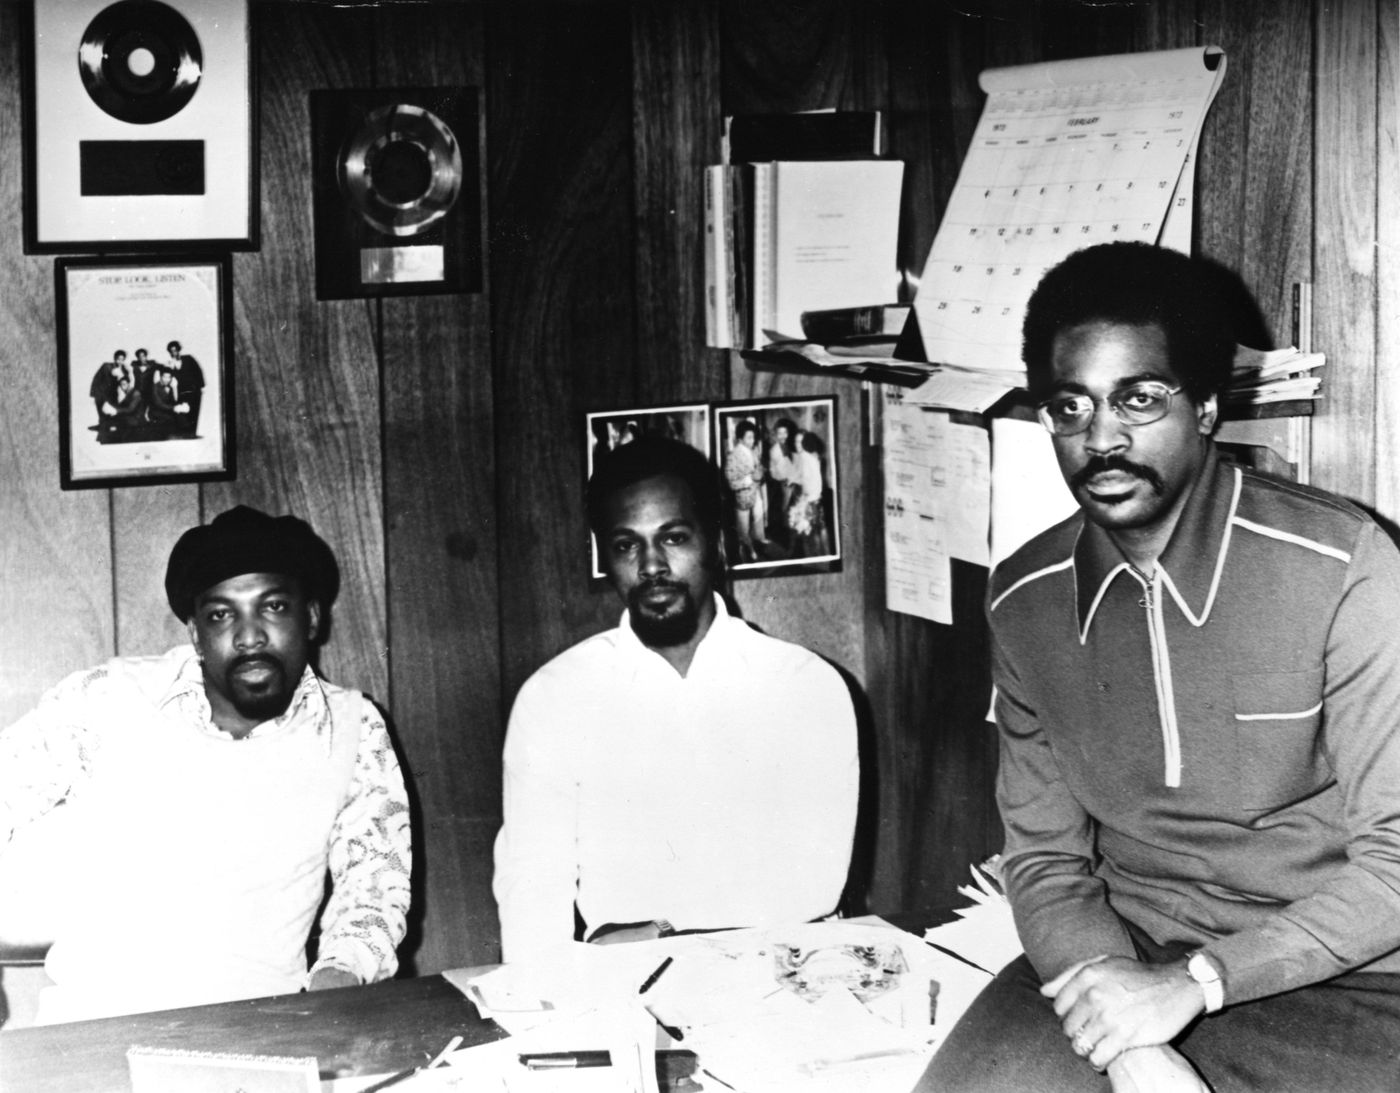 Leon Huff, Thom Bell and Kenny Gamble at the Philadelphia International Records offices in an undated photograph.